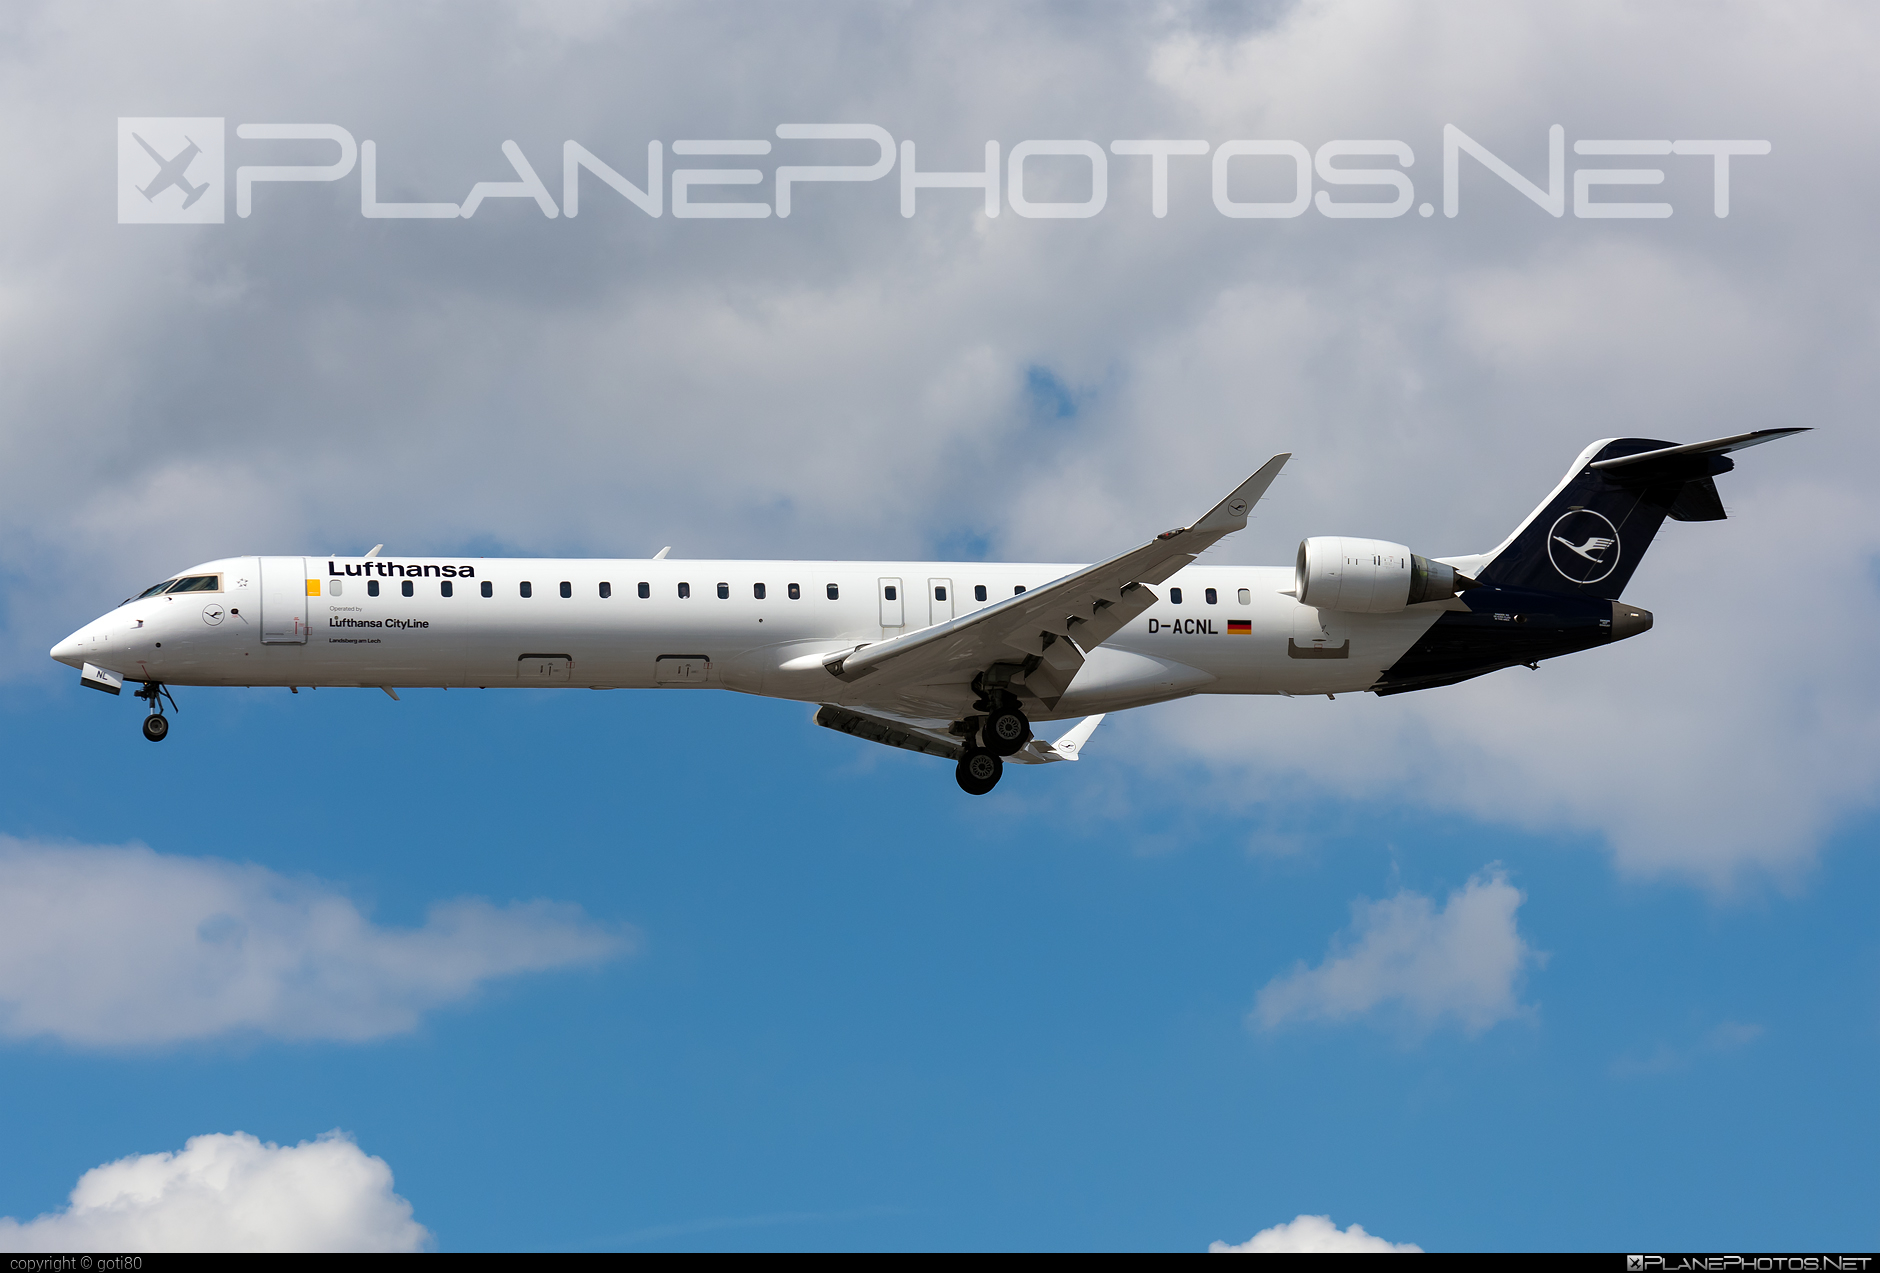 Bombardier CRJ900LR - D-ACNL operated by Lufthansa CityLine #bombardier #crj900 #crj900lr #lufthansa #lufthansacityline